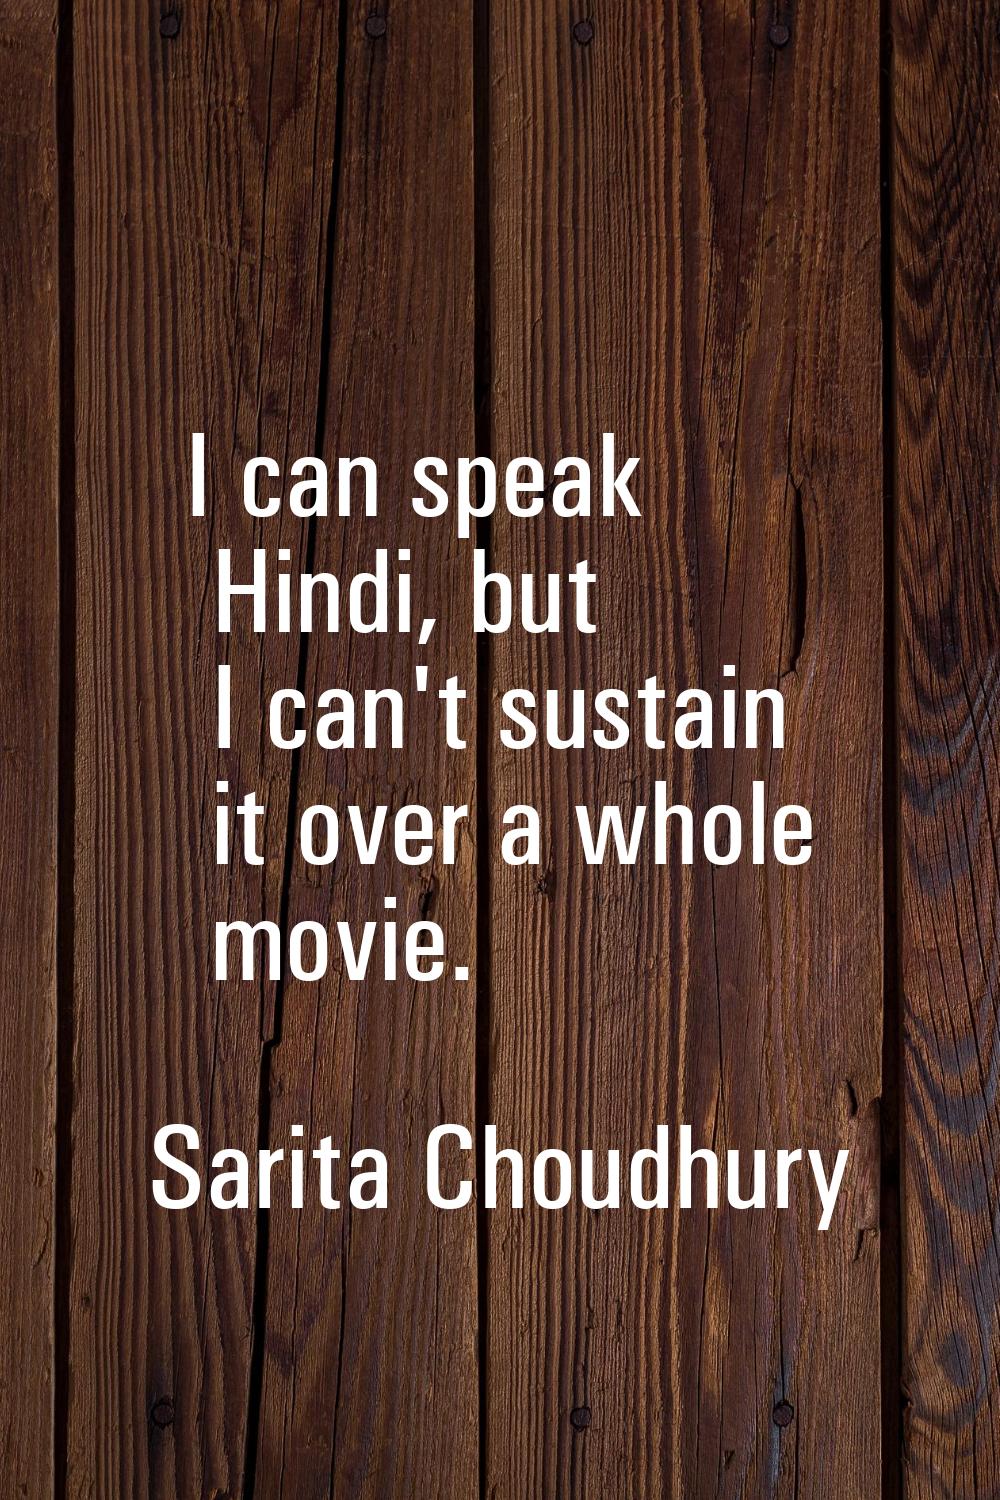 I can speak Hindi, but I can't sustain it over a whole movie.